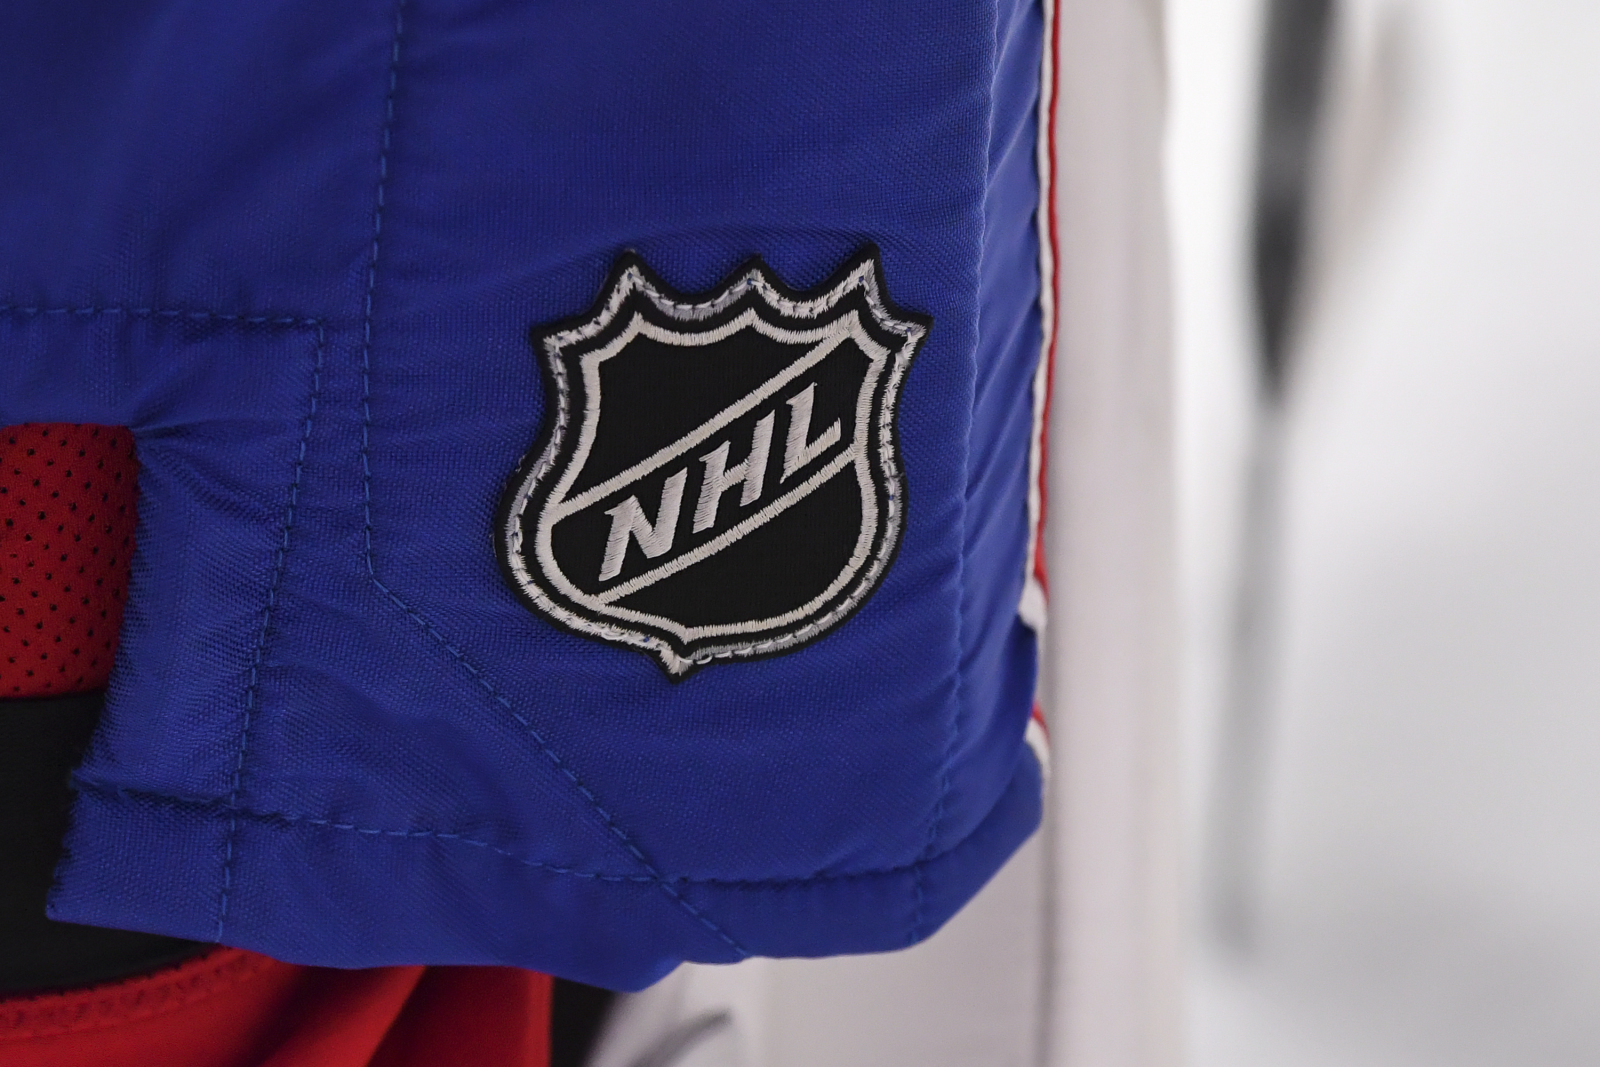 NHL's next jersey supplier: Companies that could take over from